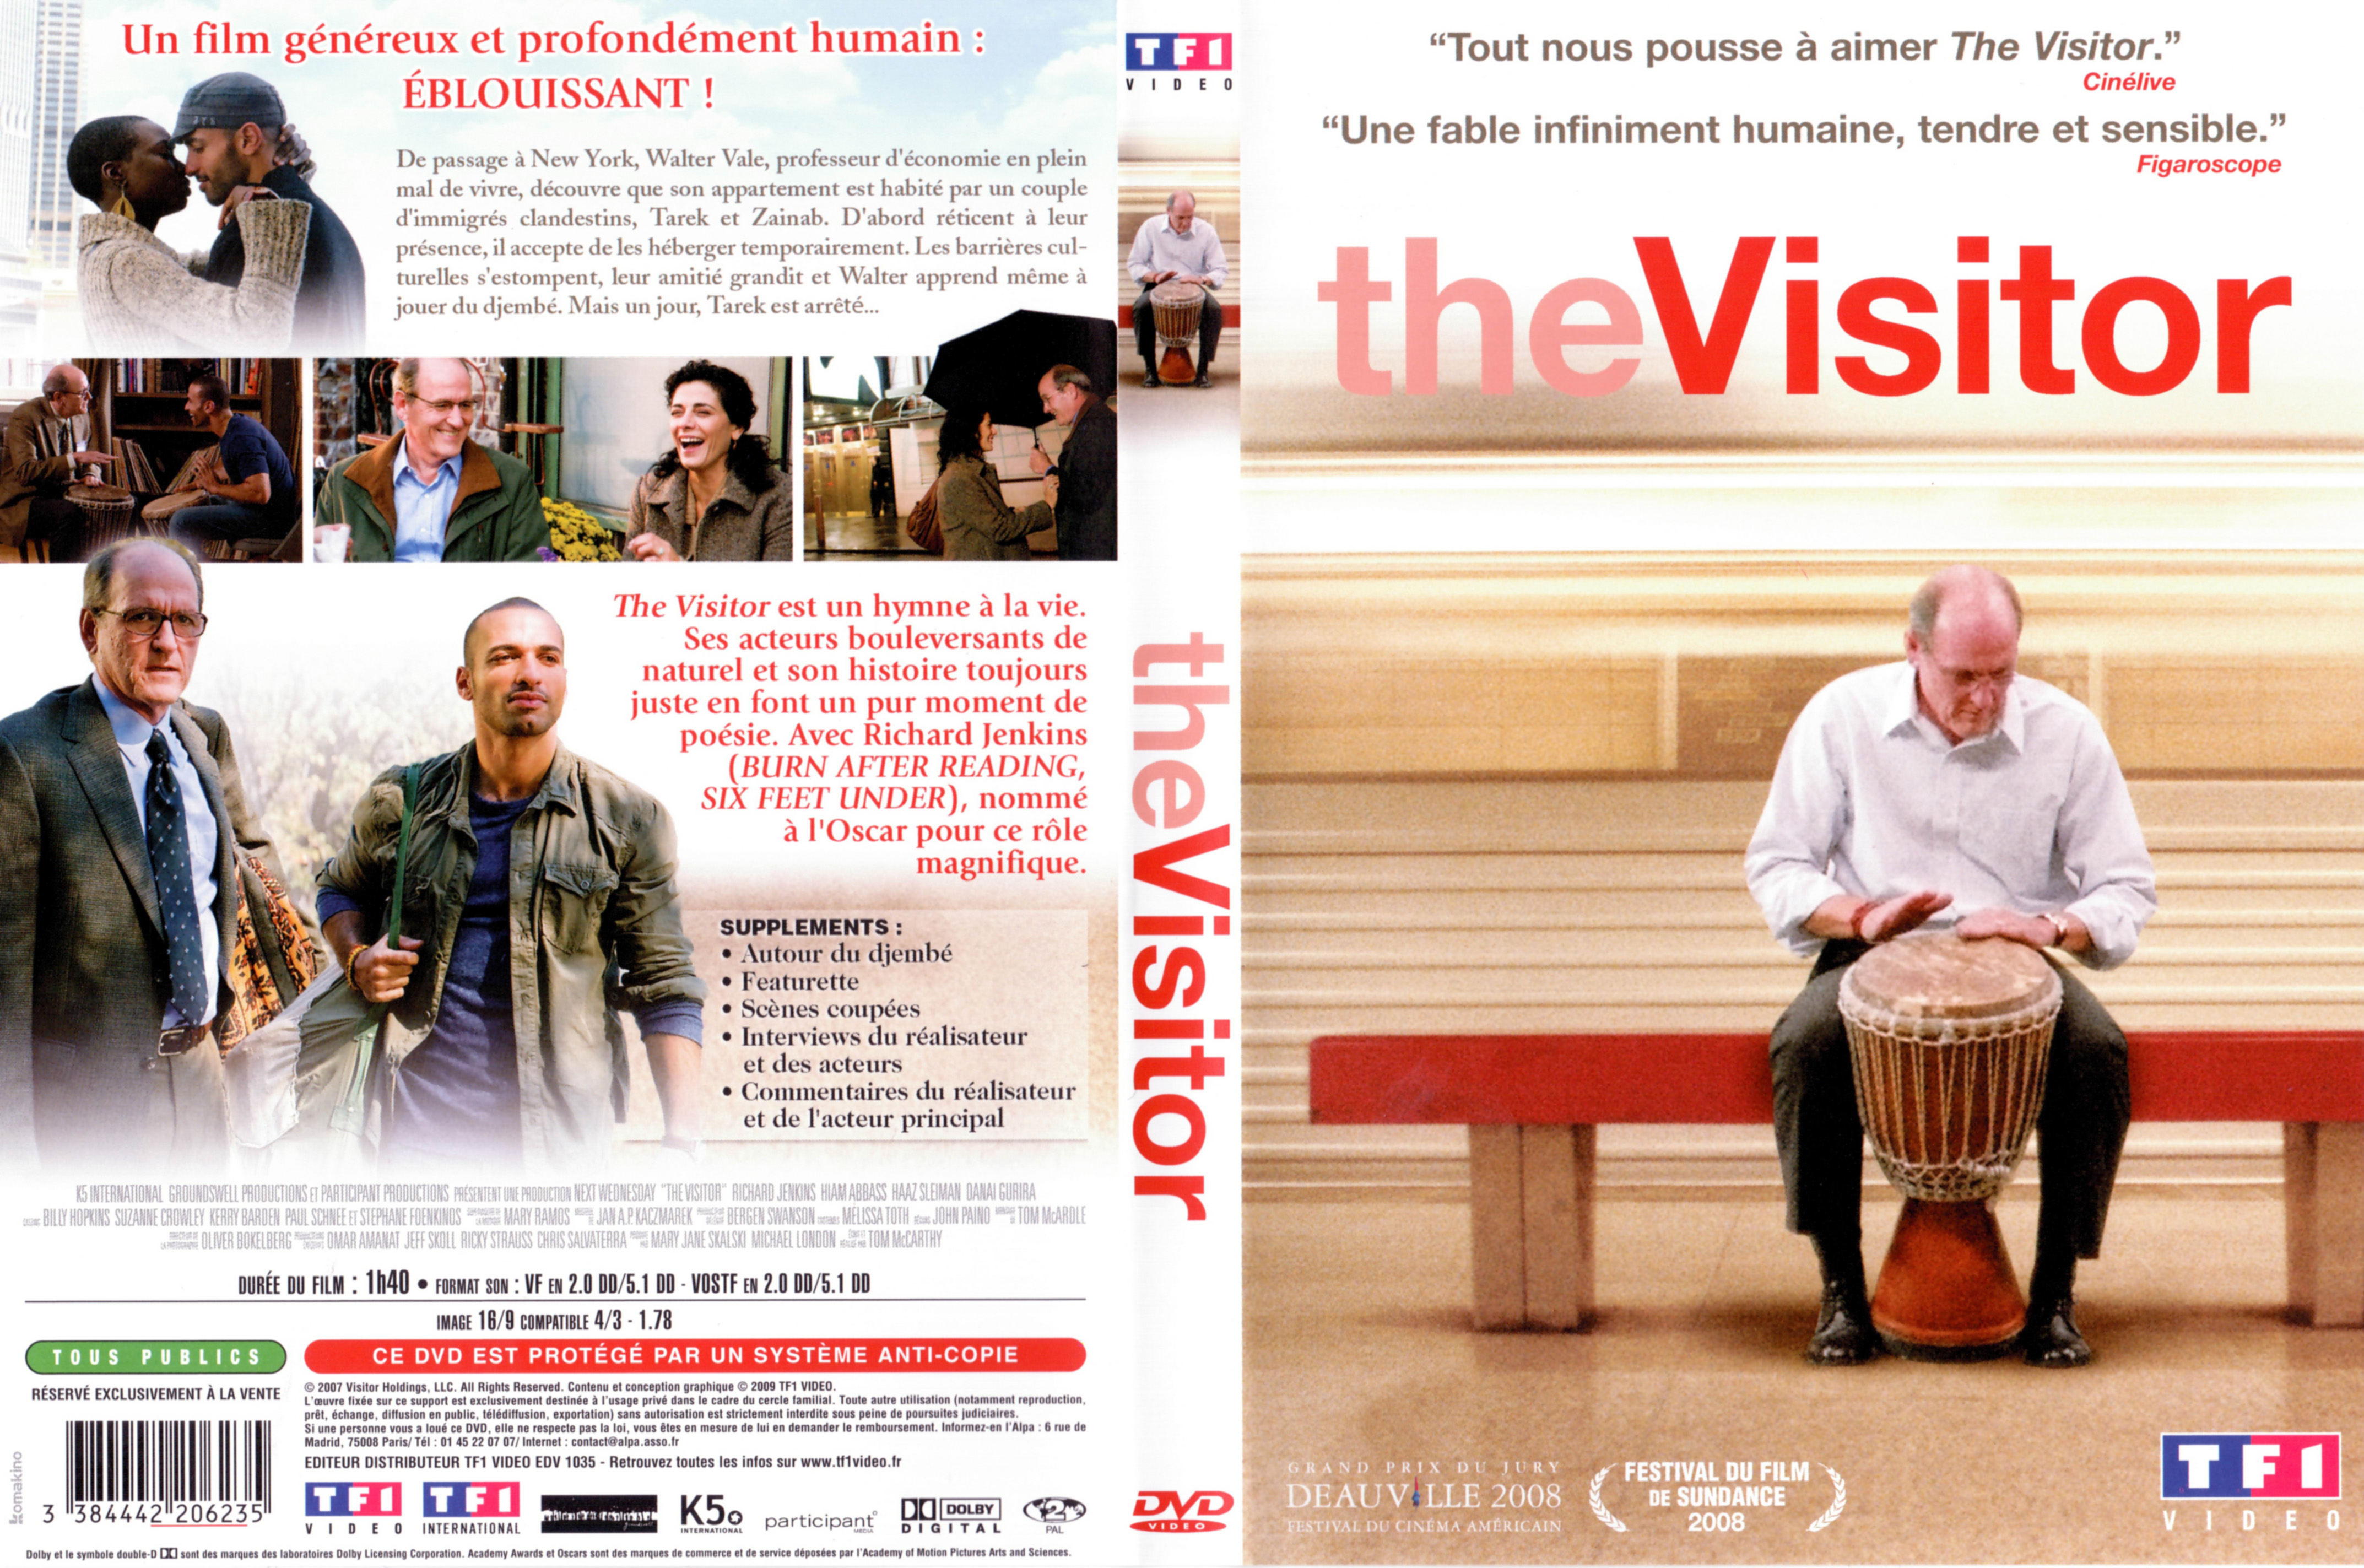 Jaquette DVD The visitor